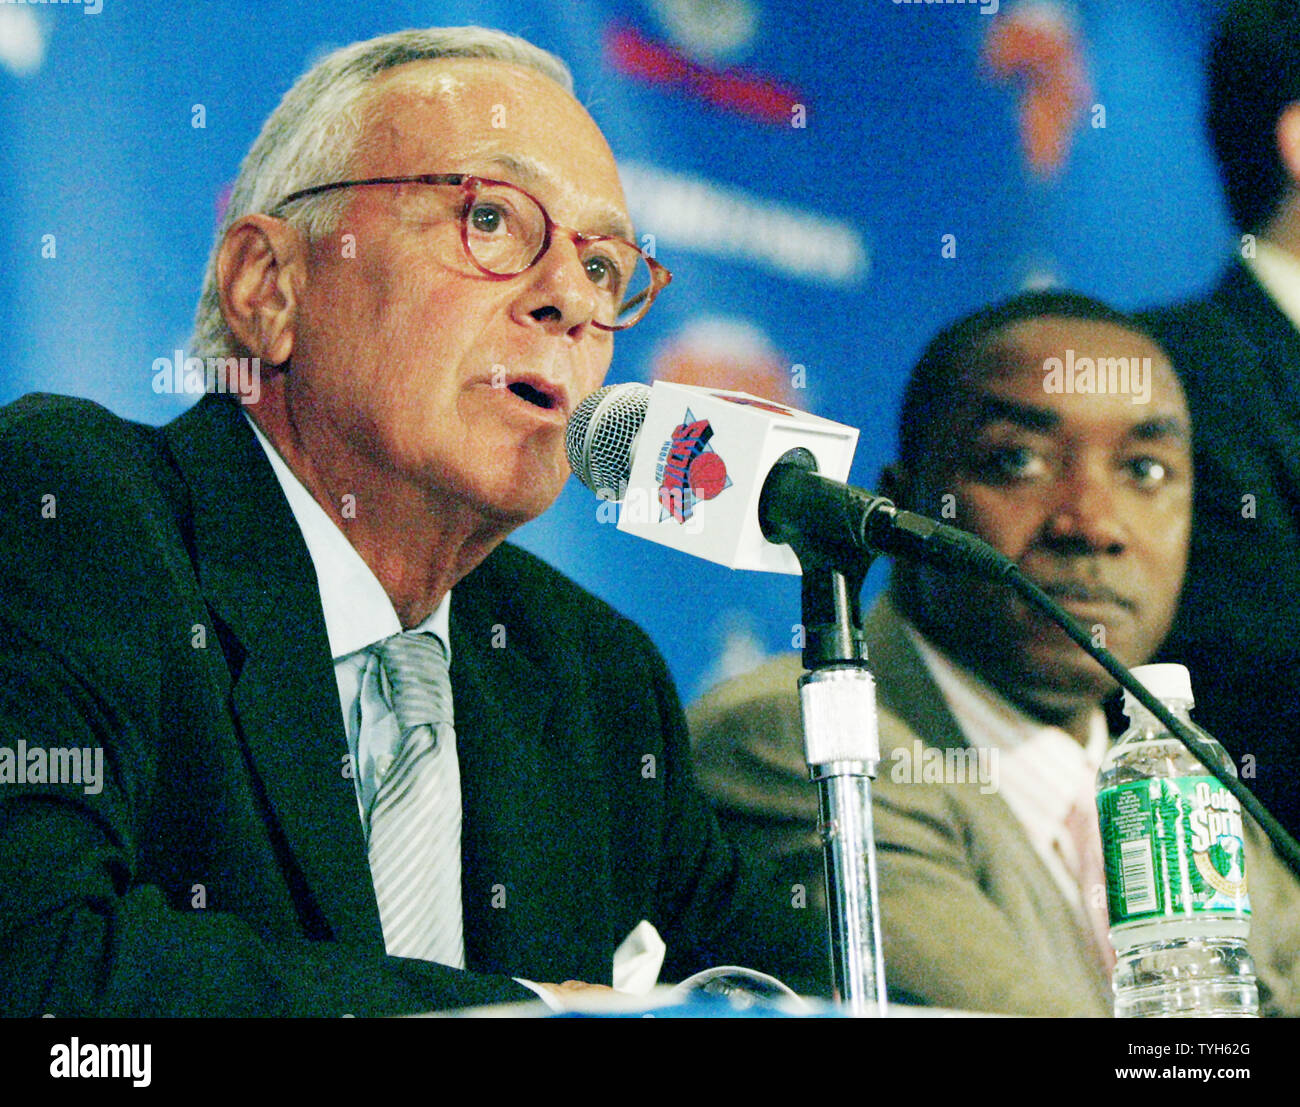 Larry Brown talks about his new position as head coach for the New York Knicks during a press conference at Madison Square Garden on July 28, 2005 in New York City. Brown, former coach for the Detroit Pistons, will be the highest paid basketball coach ever, receiving over $10 million a year.  Isiah Thomas, president of the team, listens. (UPI Photo/Monika Graff) Stock Photo